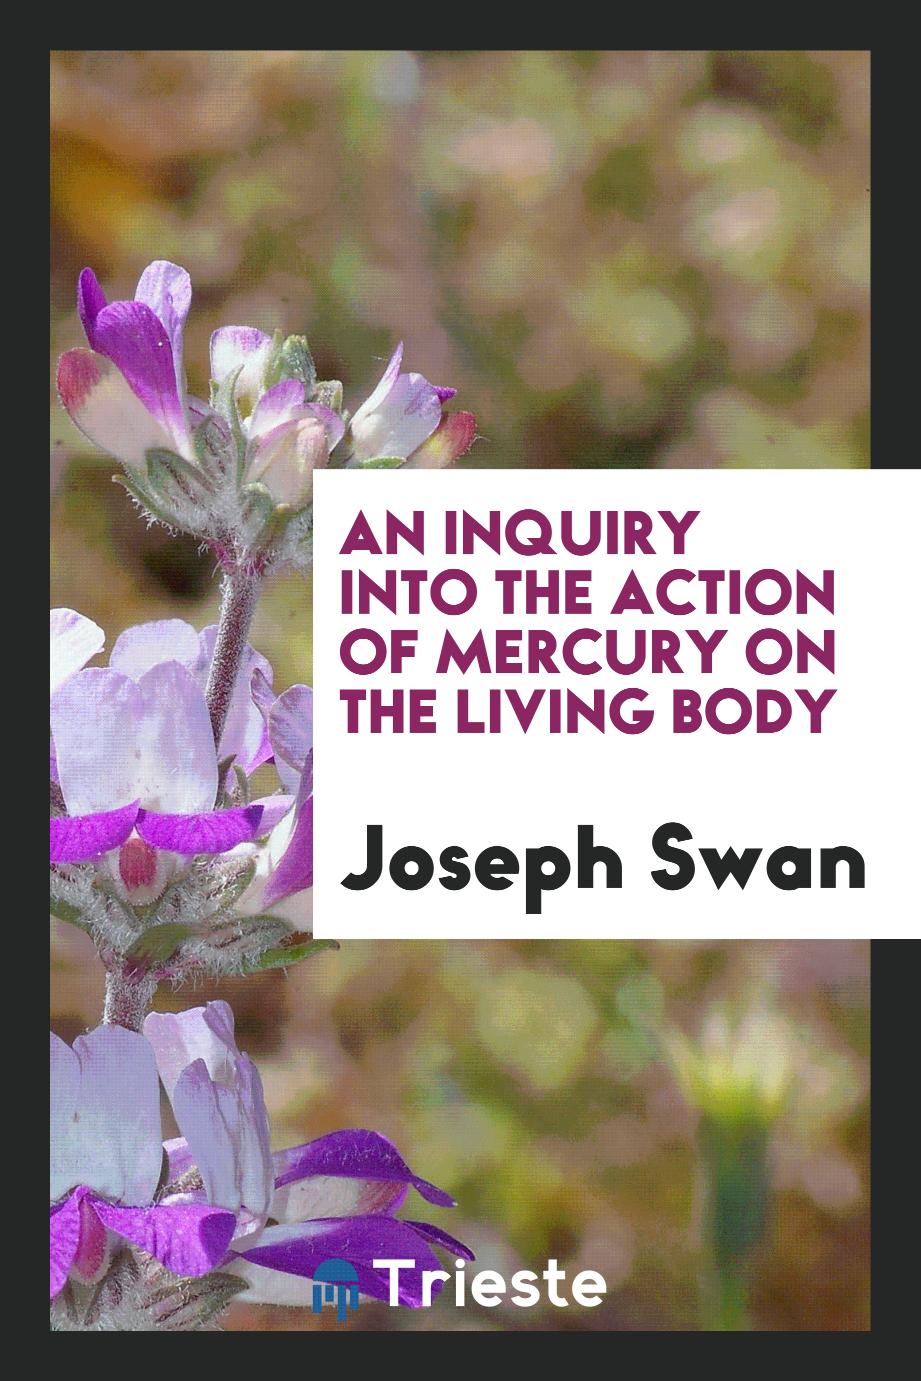 An inquiry into the action of mercury on the living body